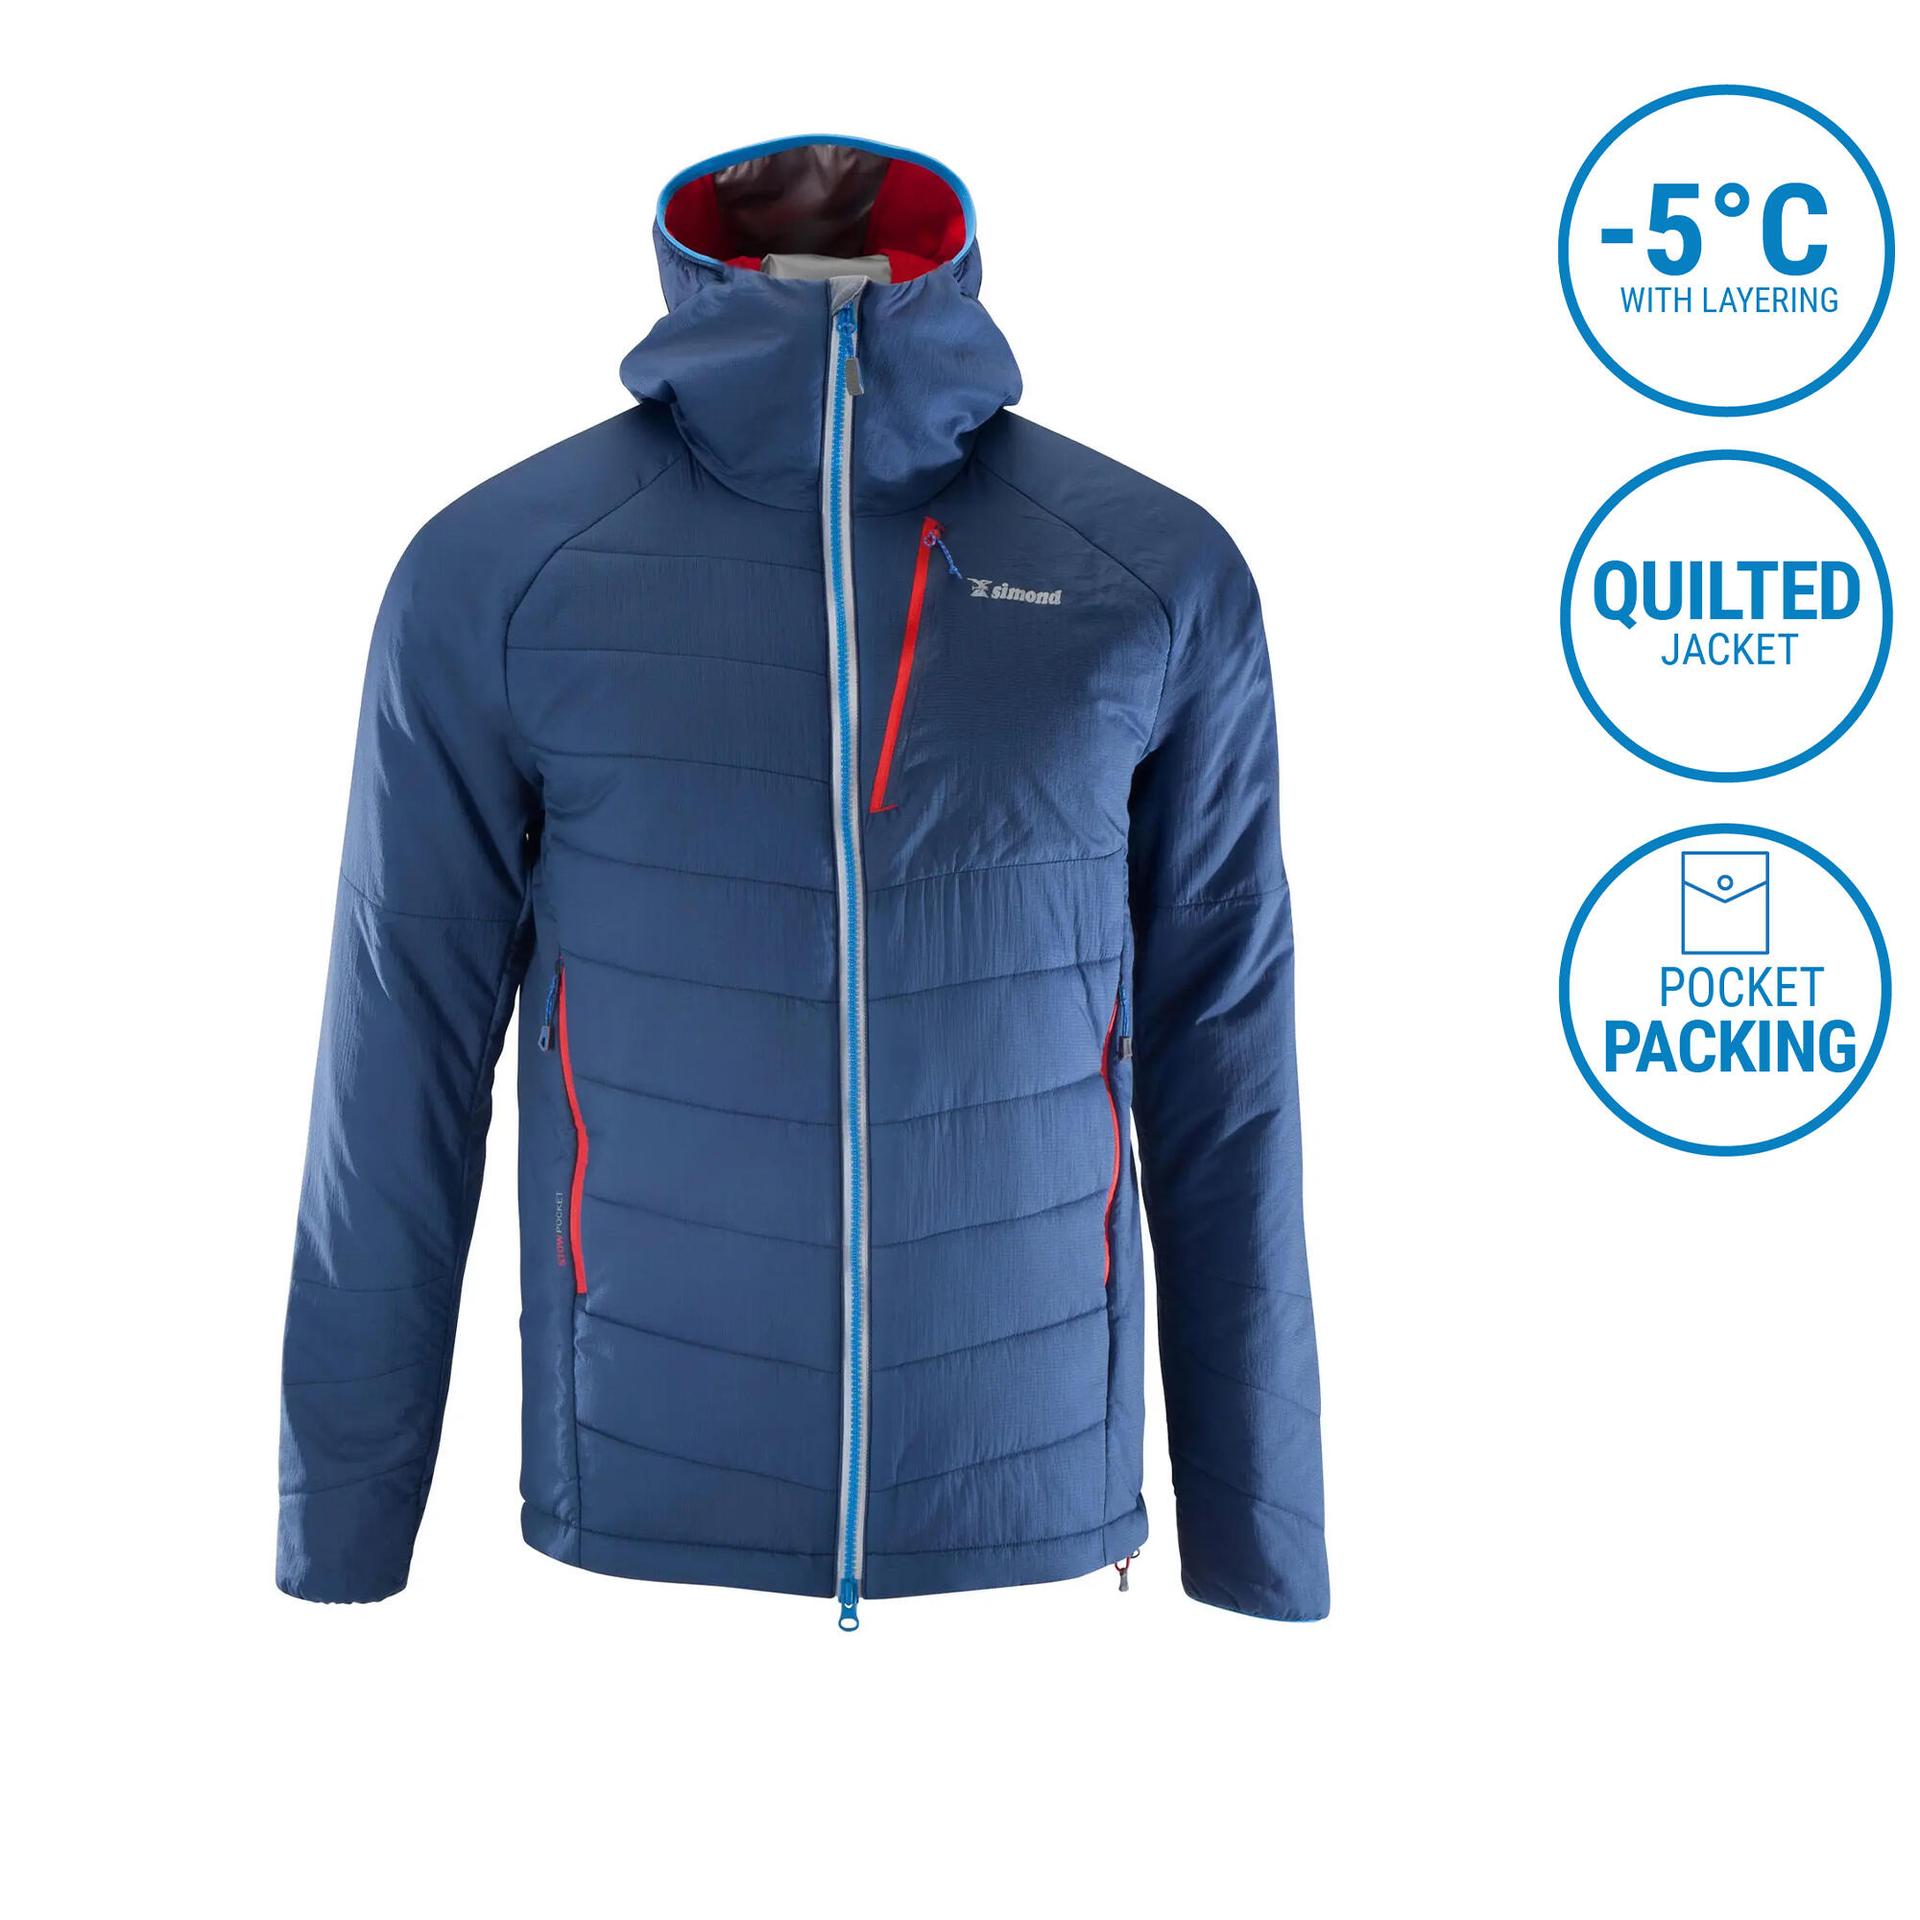 men's mountaineering synthetic quilt insulated jacket for -5 degrees.